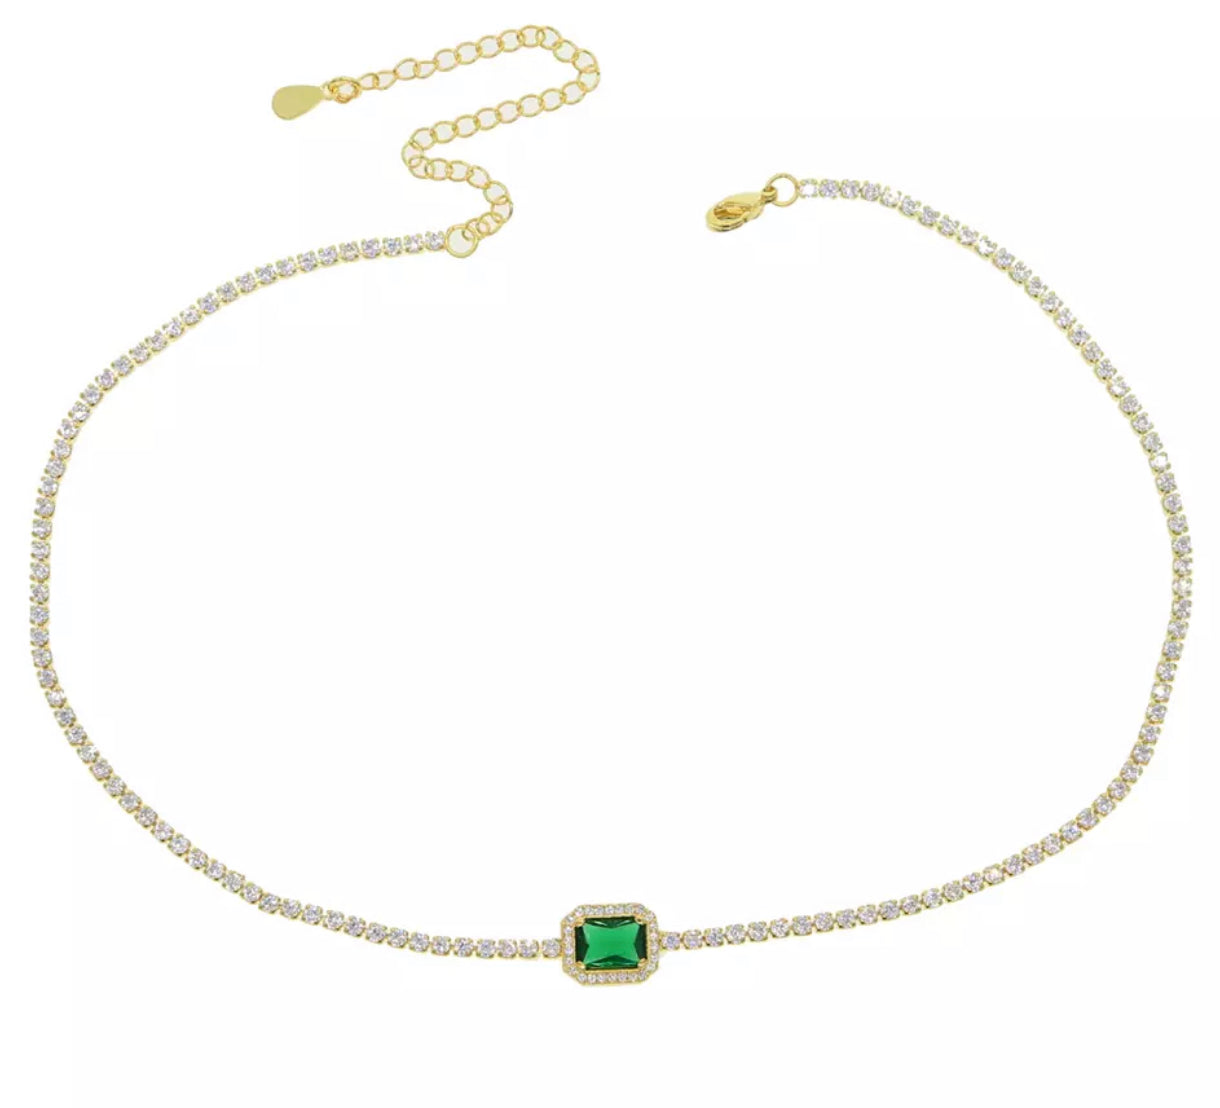 Center your Green Dainty Necklace